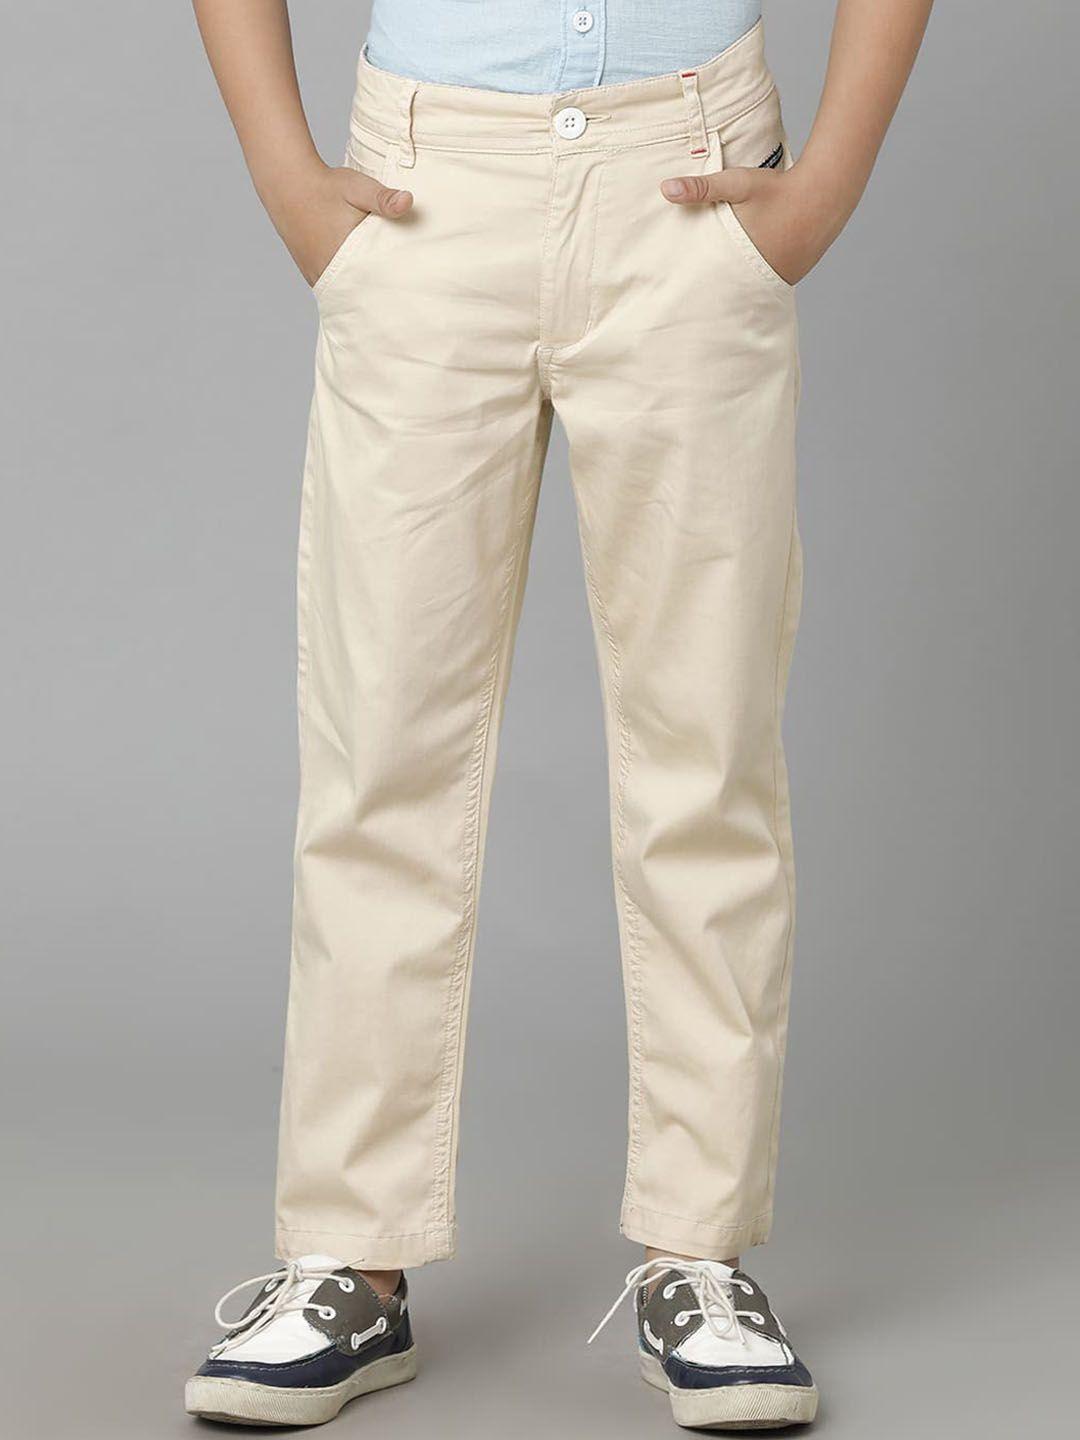 under fourteen only boys chinos cotton trousers